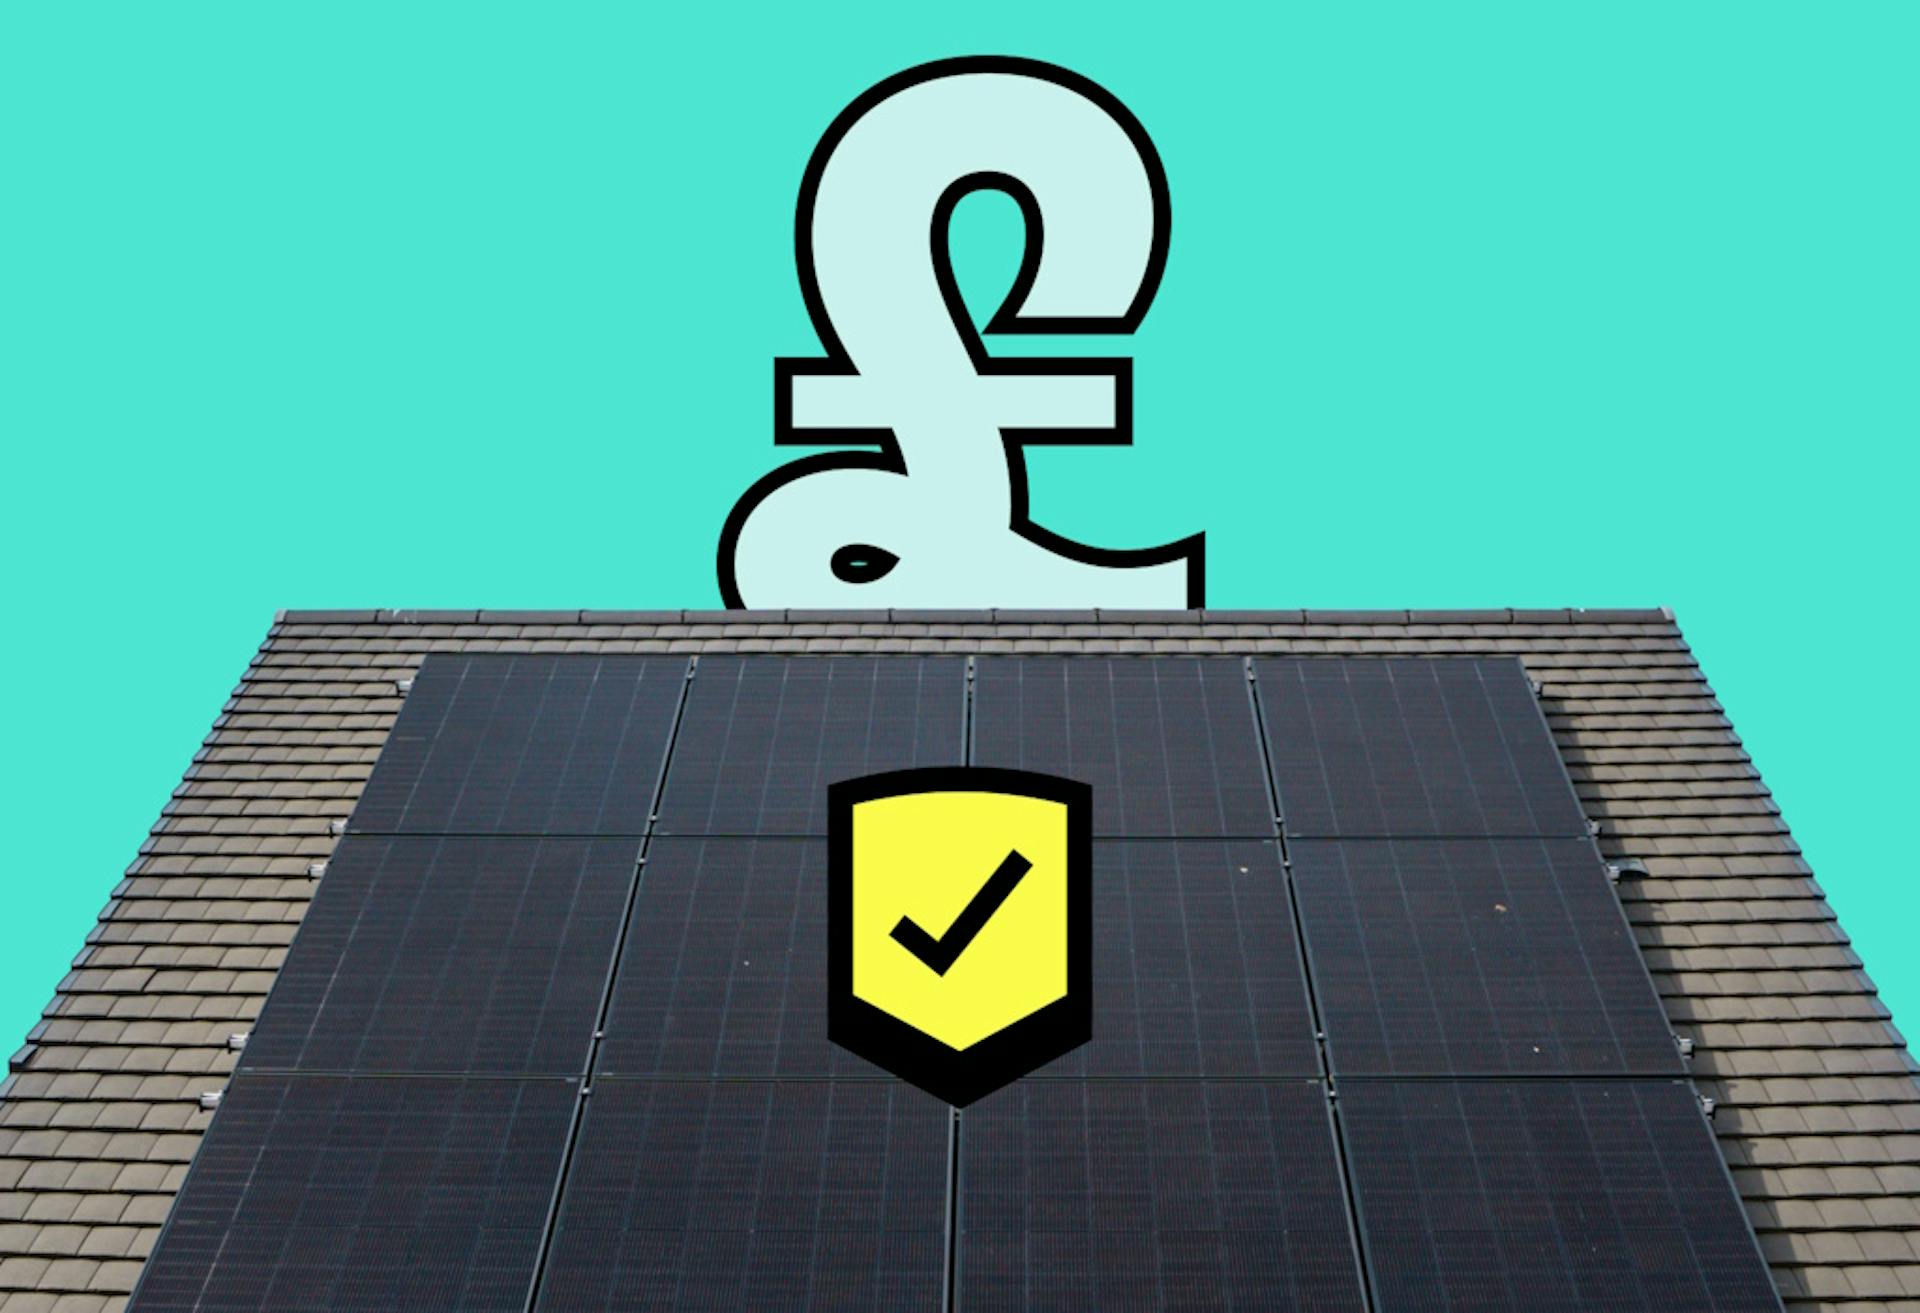 A slate roof with black solar panels. A yellow cartoon shield with a black tick on it is in the centre of the panels, and a blue pound sign outlined in black is above the roof, all against an aquamarine background